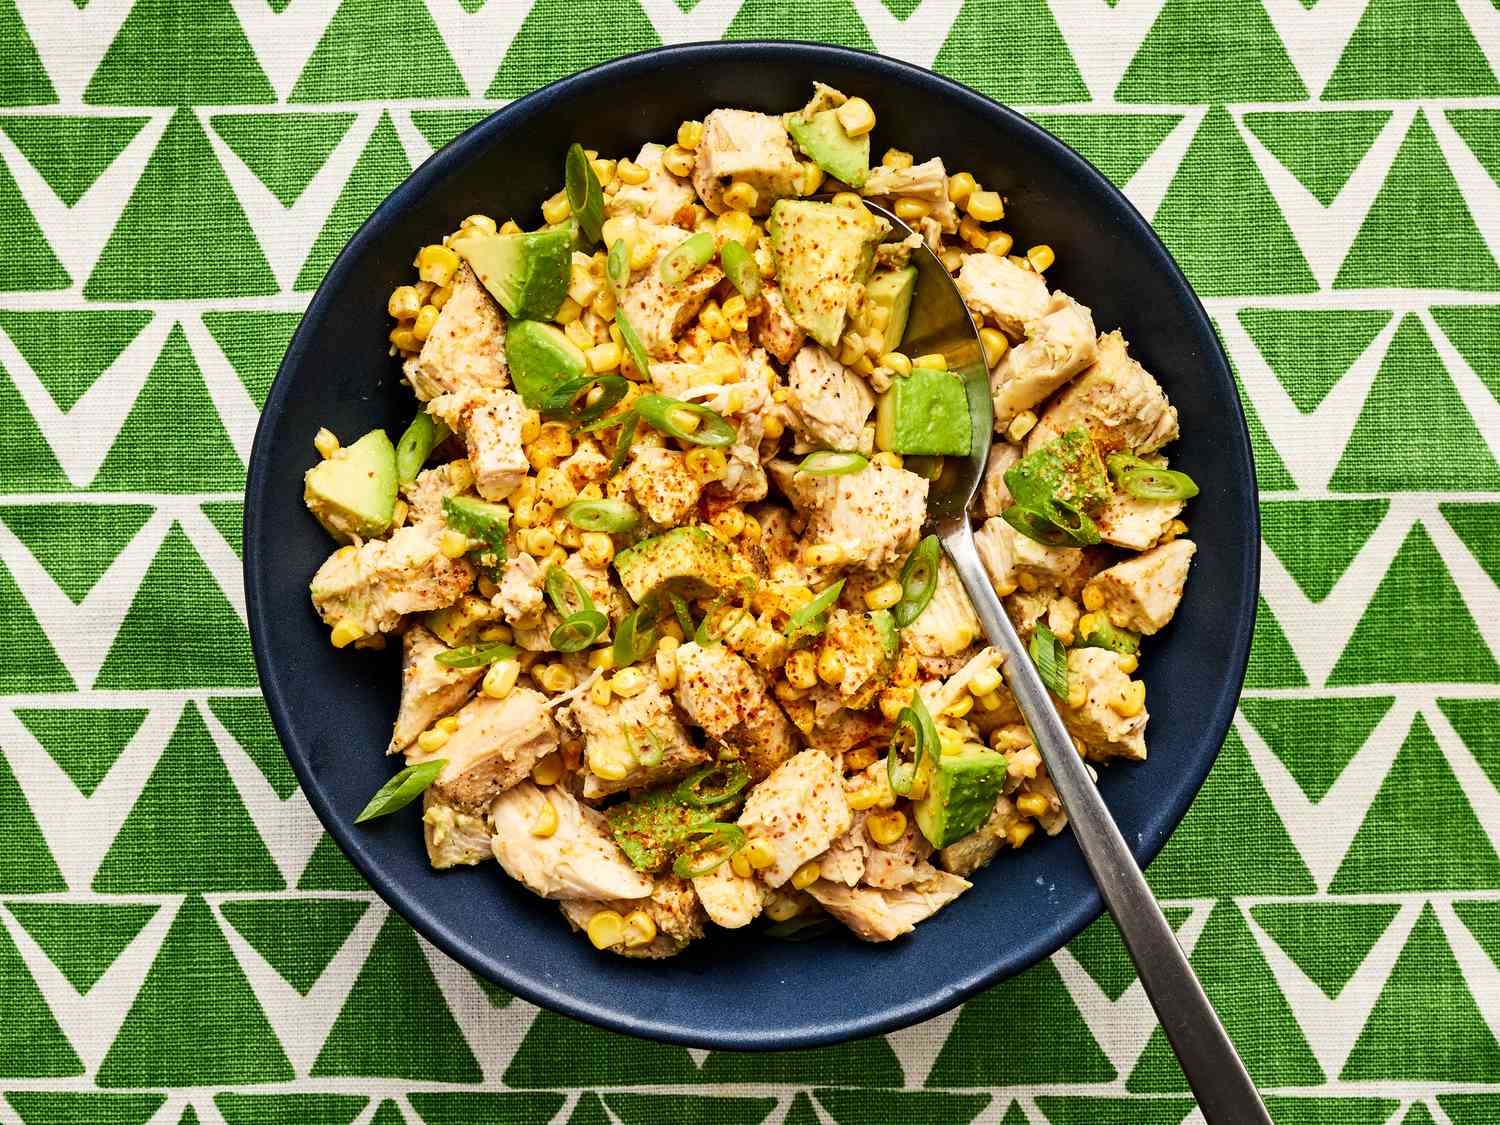 Overhead view of avocado and chicken salad on a green triangle patterned backdrop